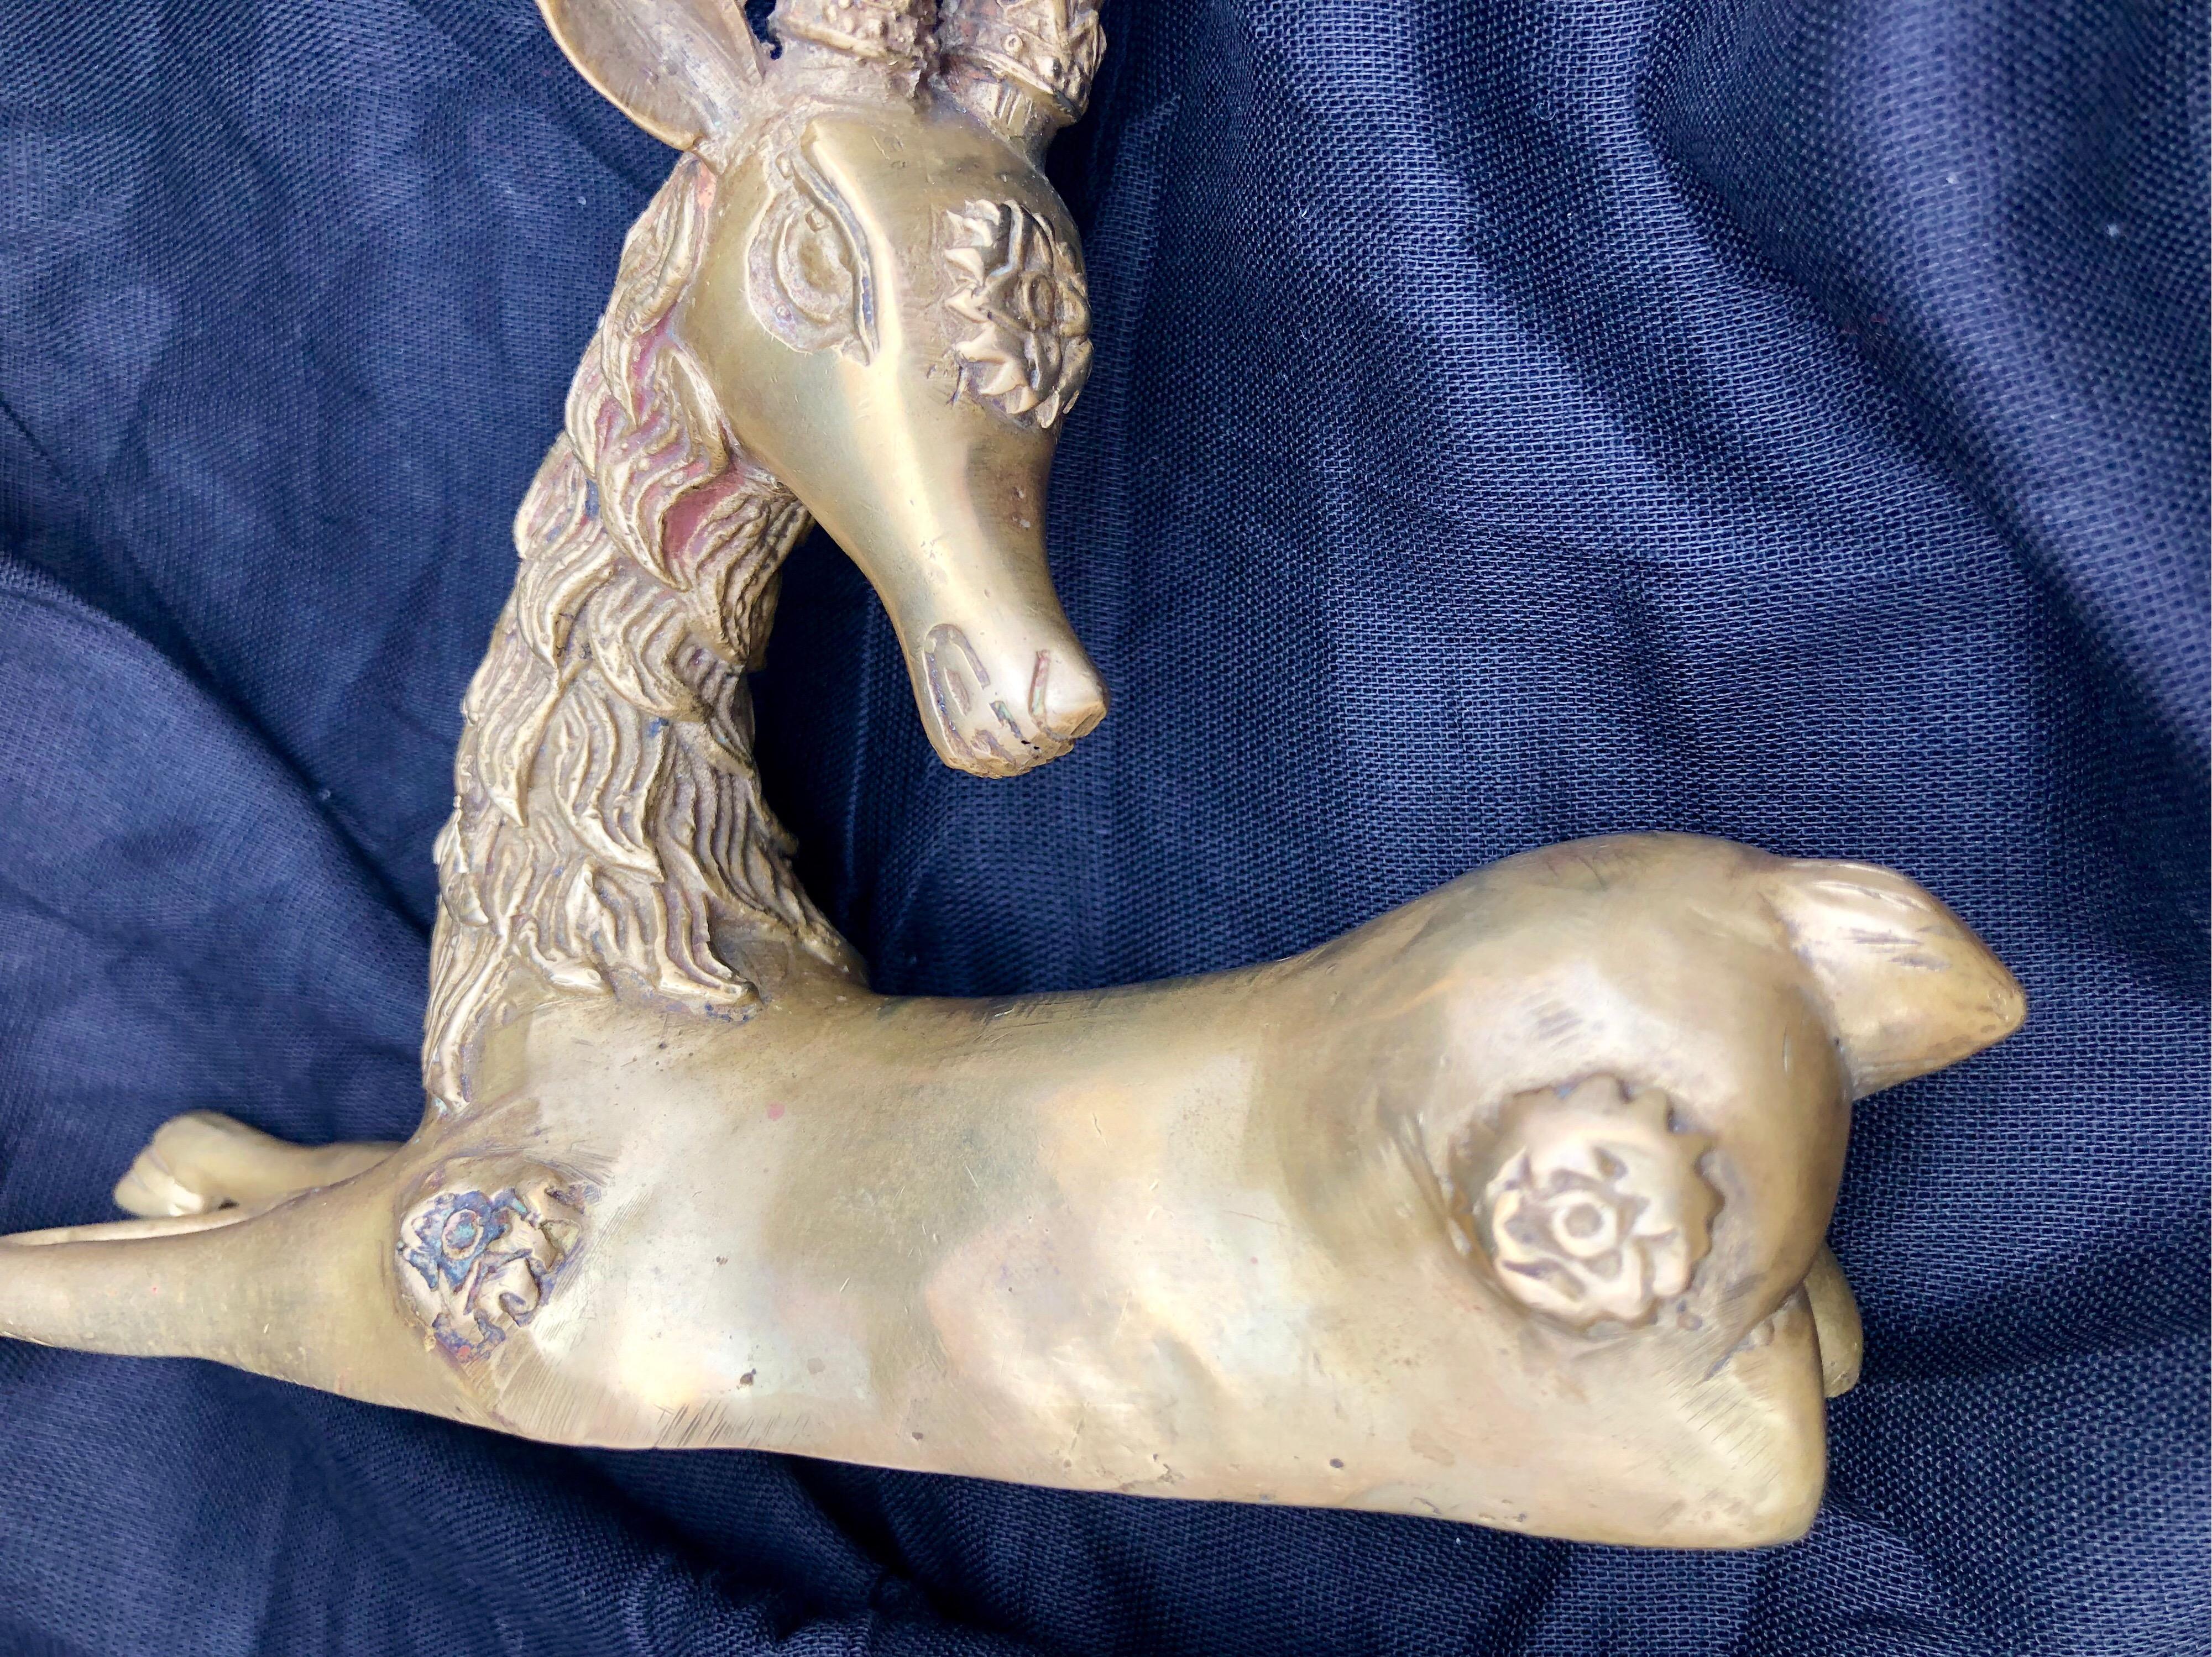 Antique Moroccan Brass Gazelle, Early 1900s Embossed African Animal Sculpture For Sale 7